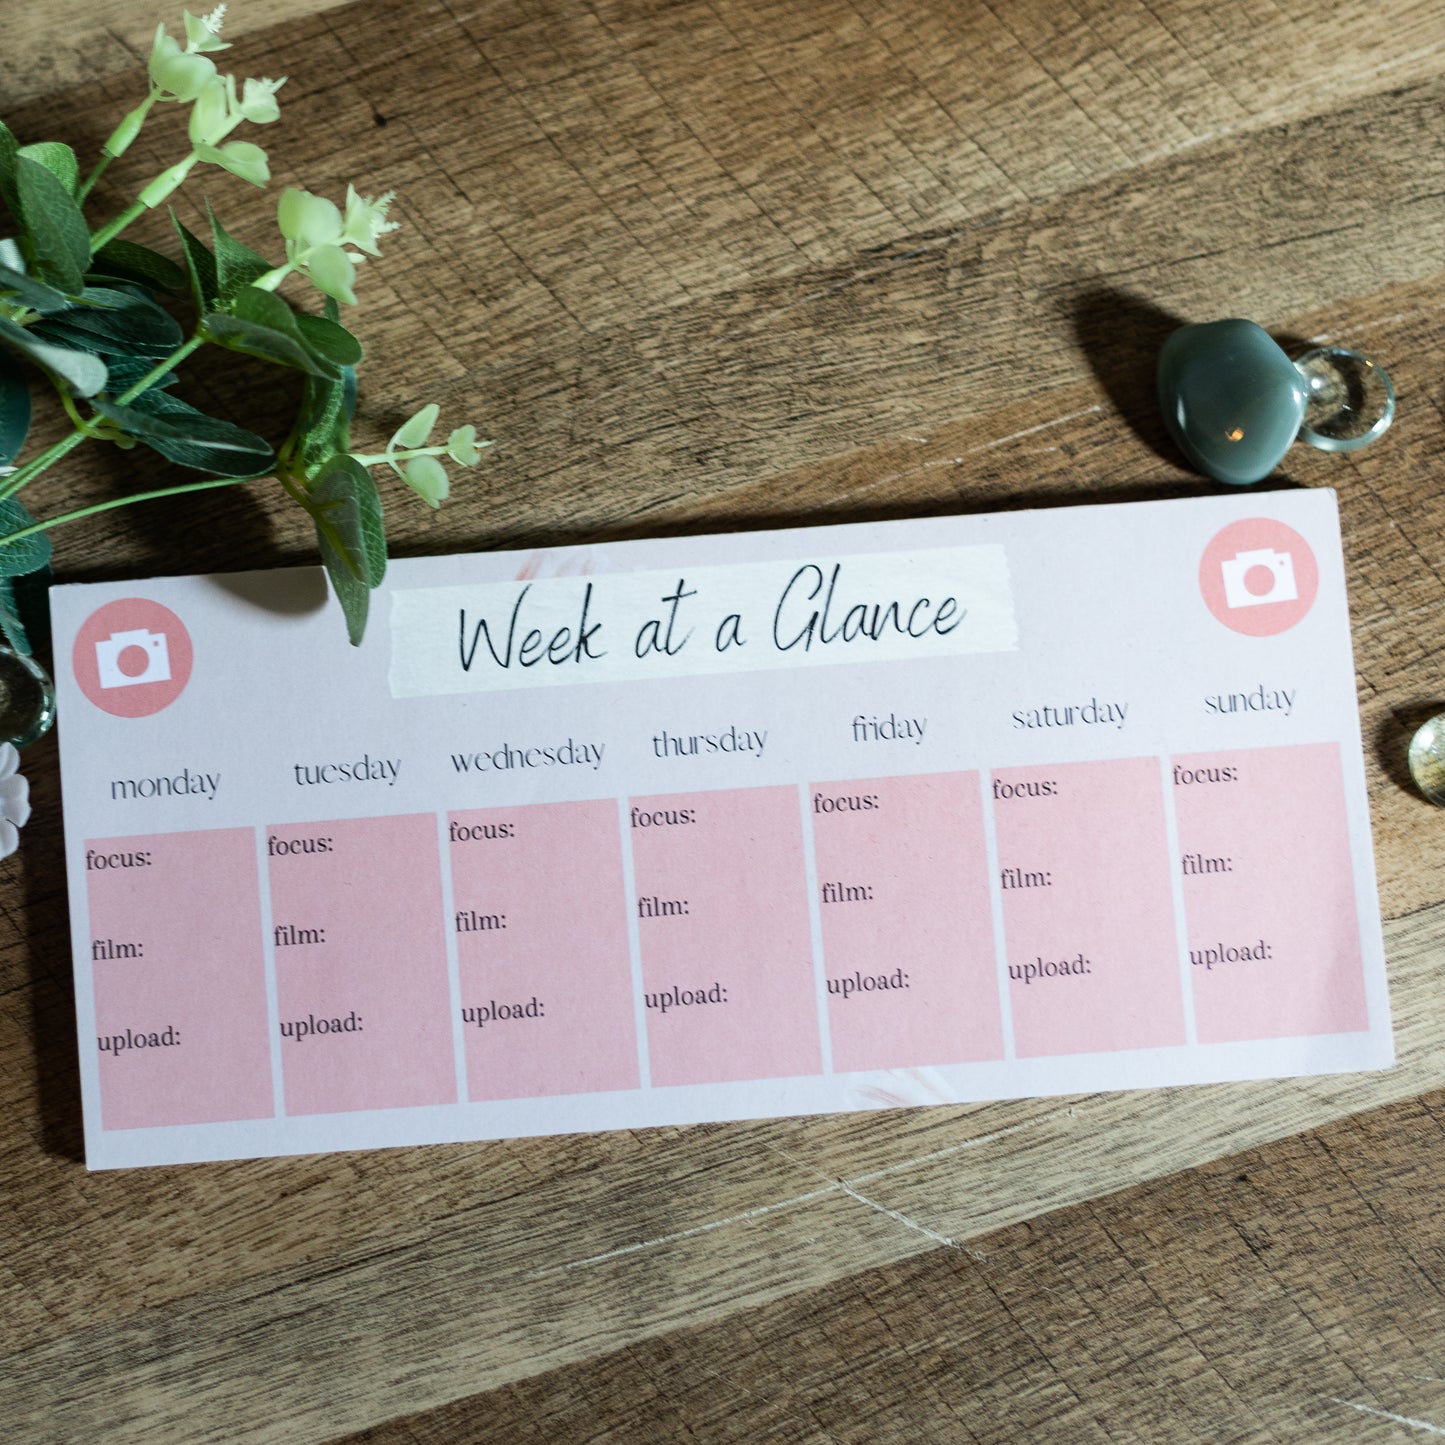 Week at Glance with Prompts Notepad